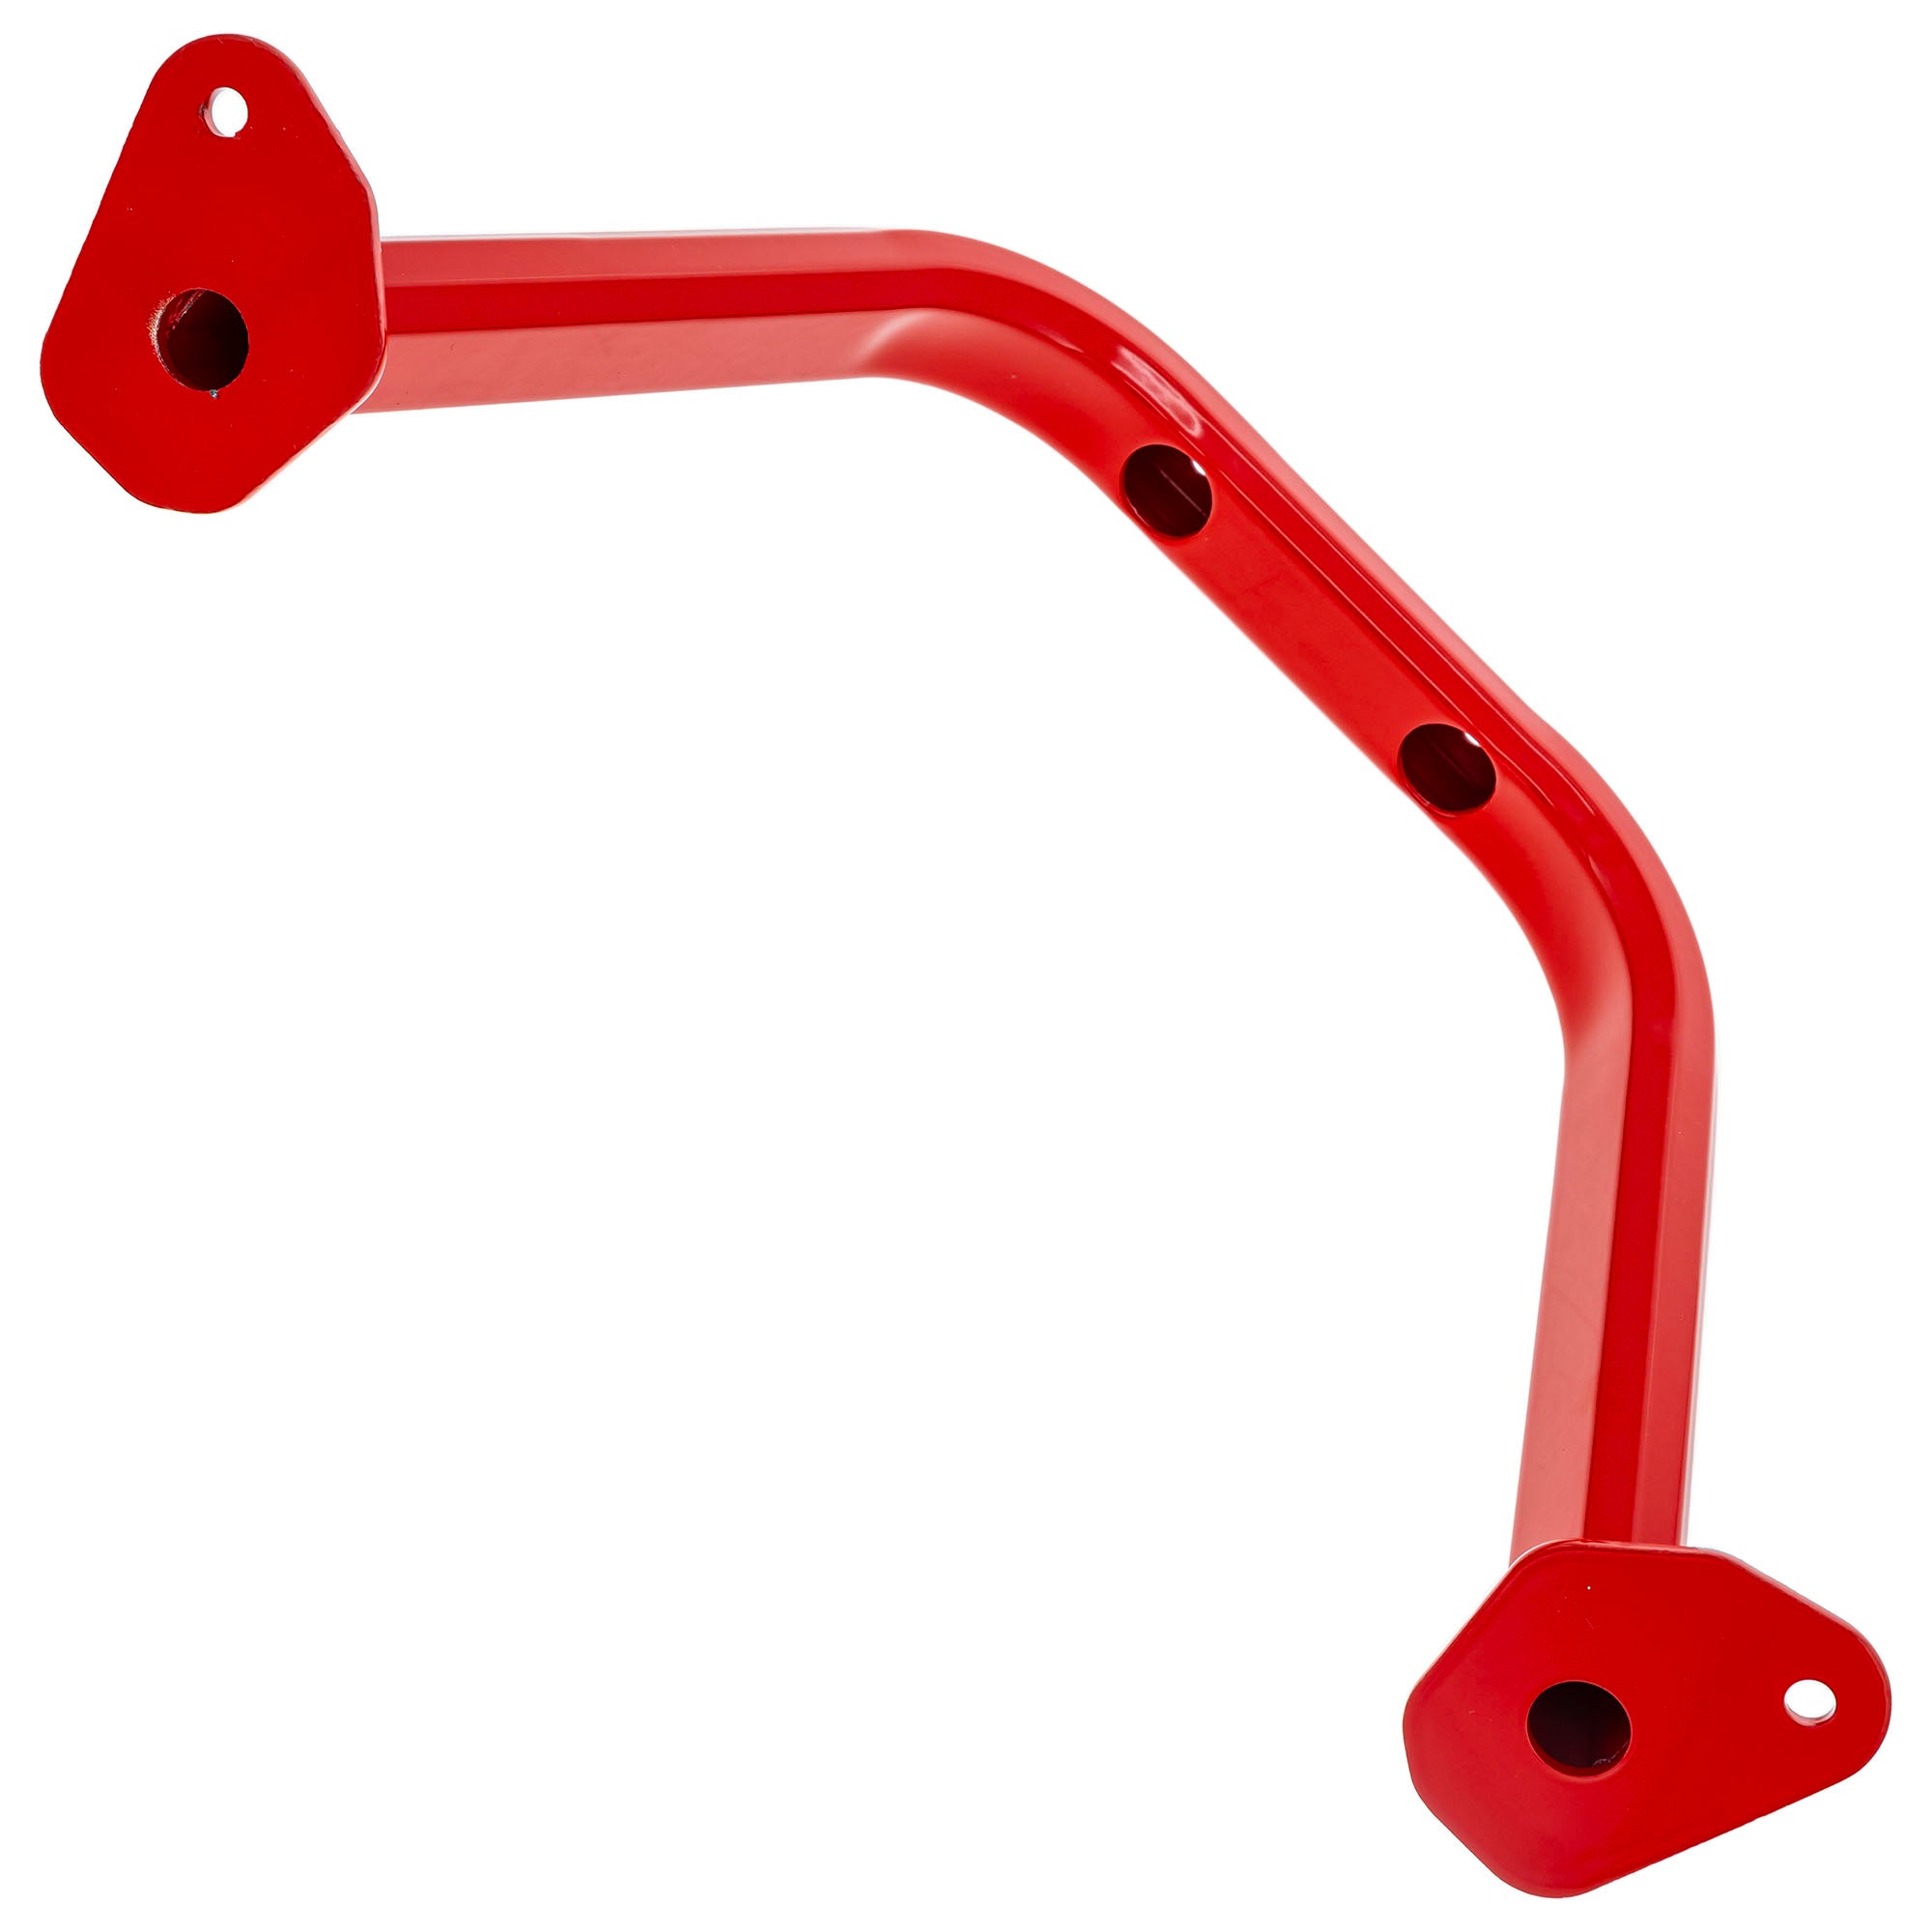 Polaris 1018789-293 Indy Red Seat Support 2015 PRO RMK Assault